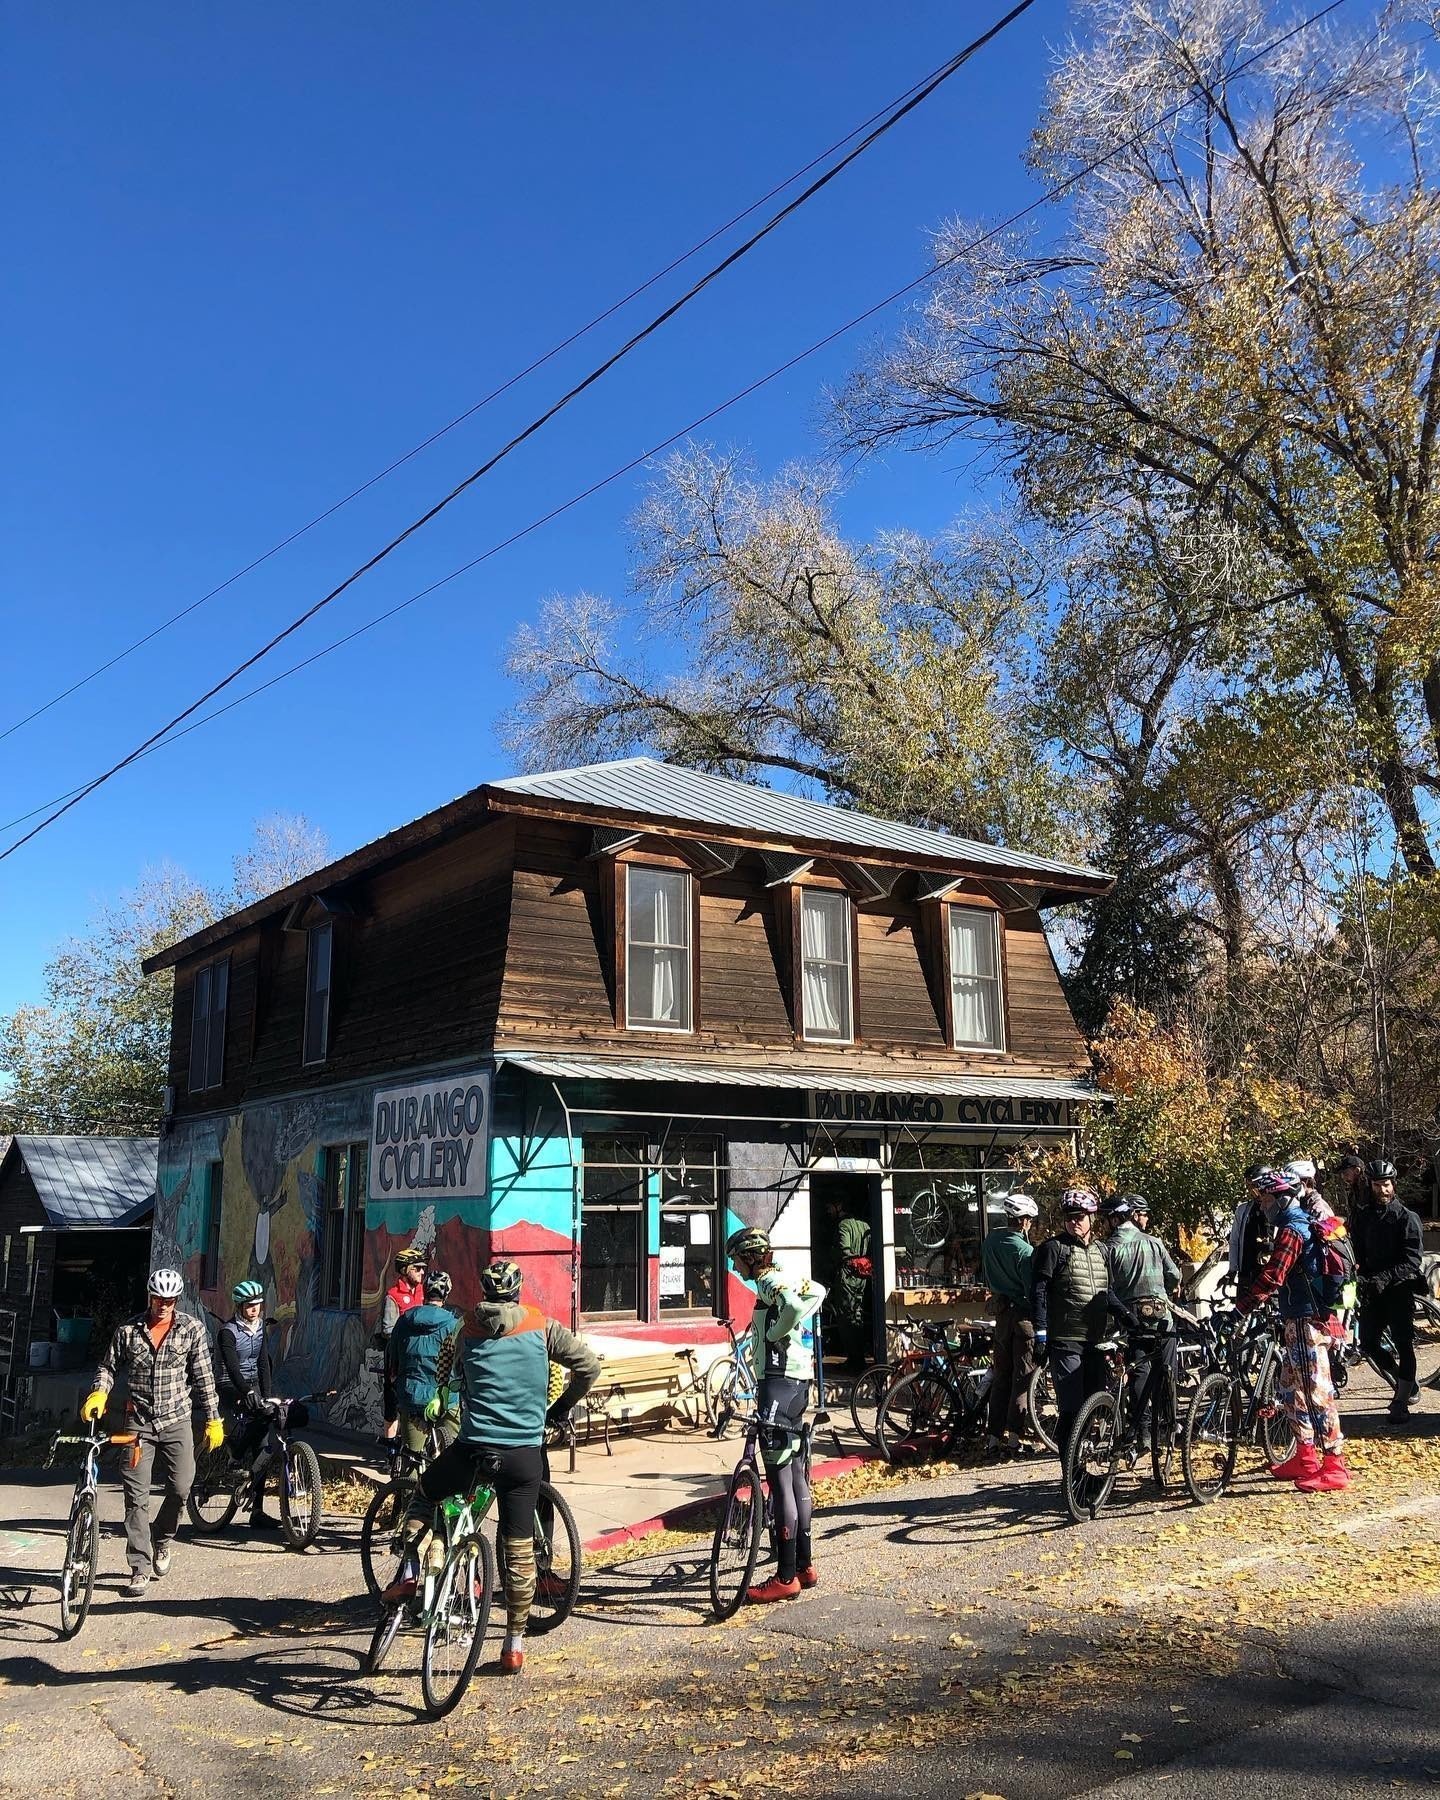 Durango Valley View's owners love riding bikes. Durango has some great locally-owned shops serving the community and visitors. Each shop has its own shop vibe, personalities, boutique bike brands and connections to the riding community.⁠
⁠
Downtown D